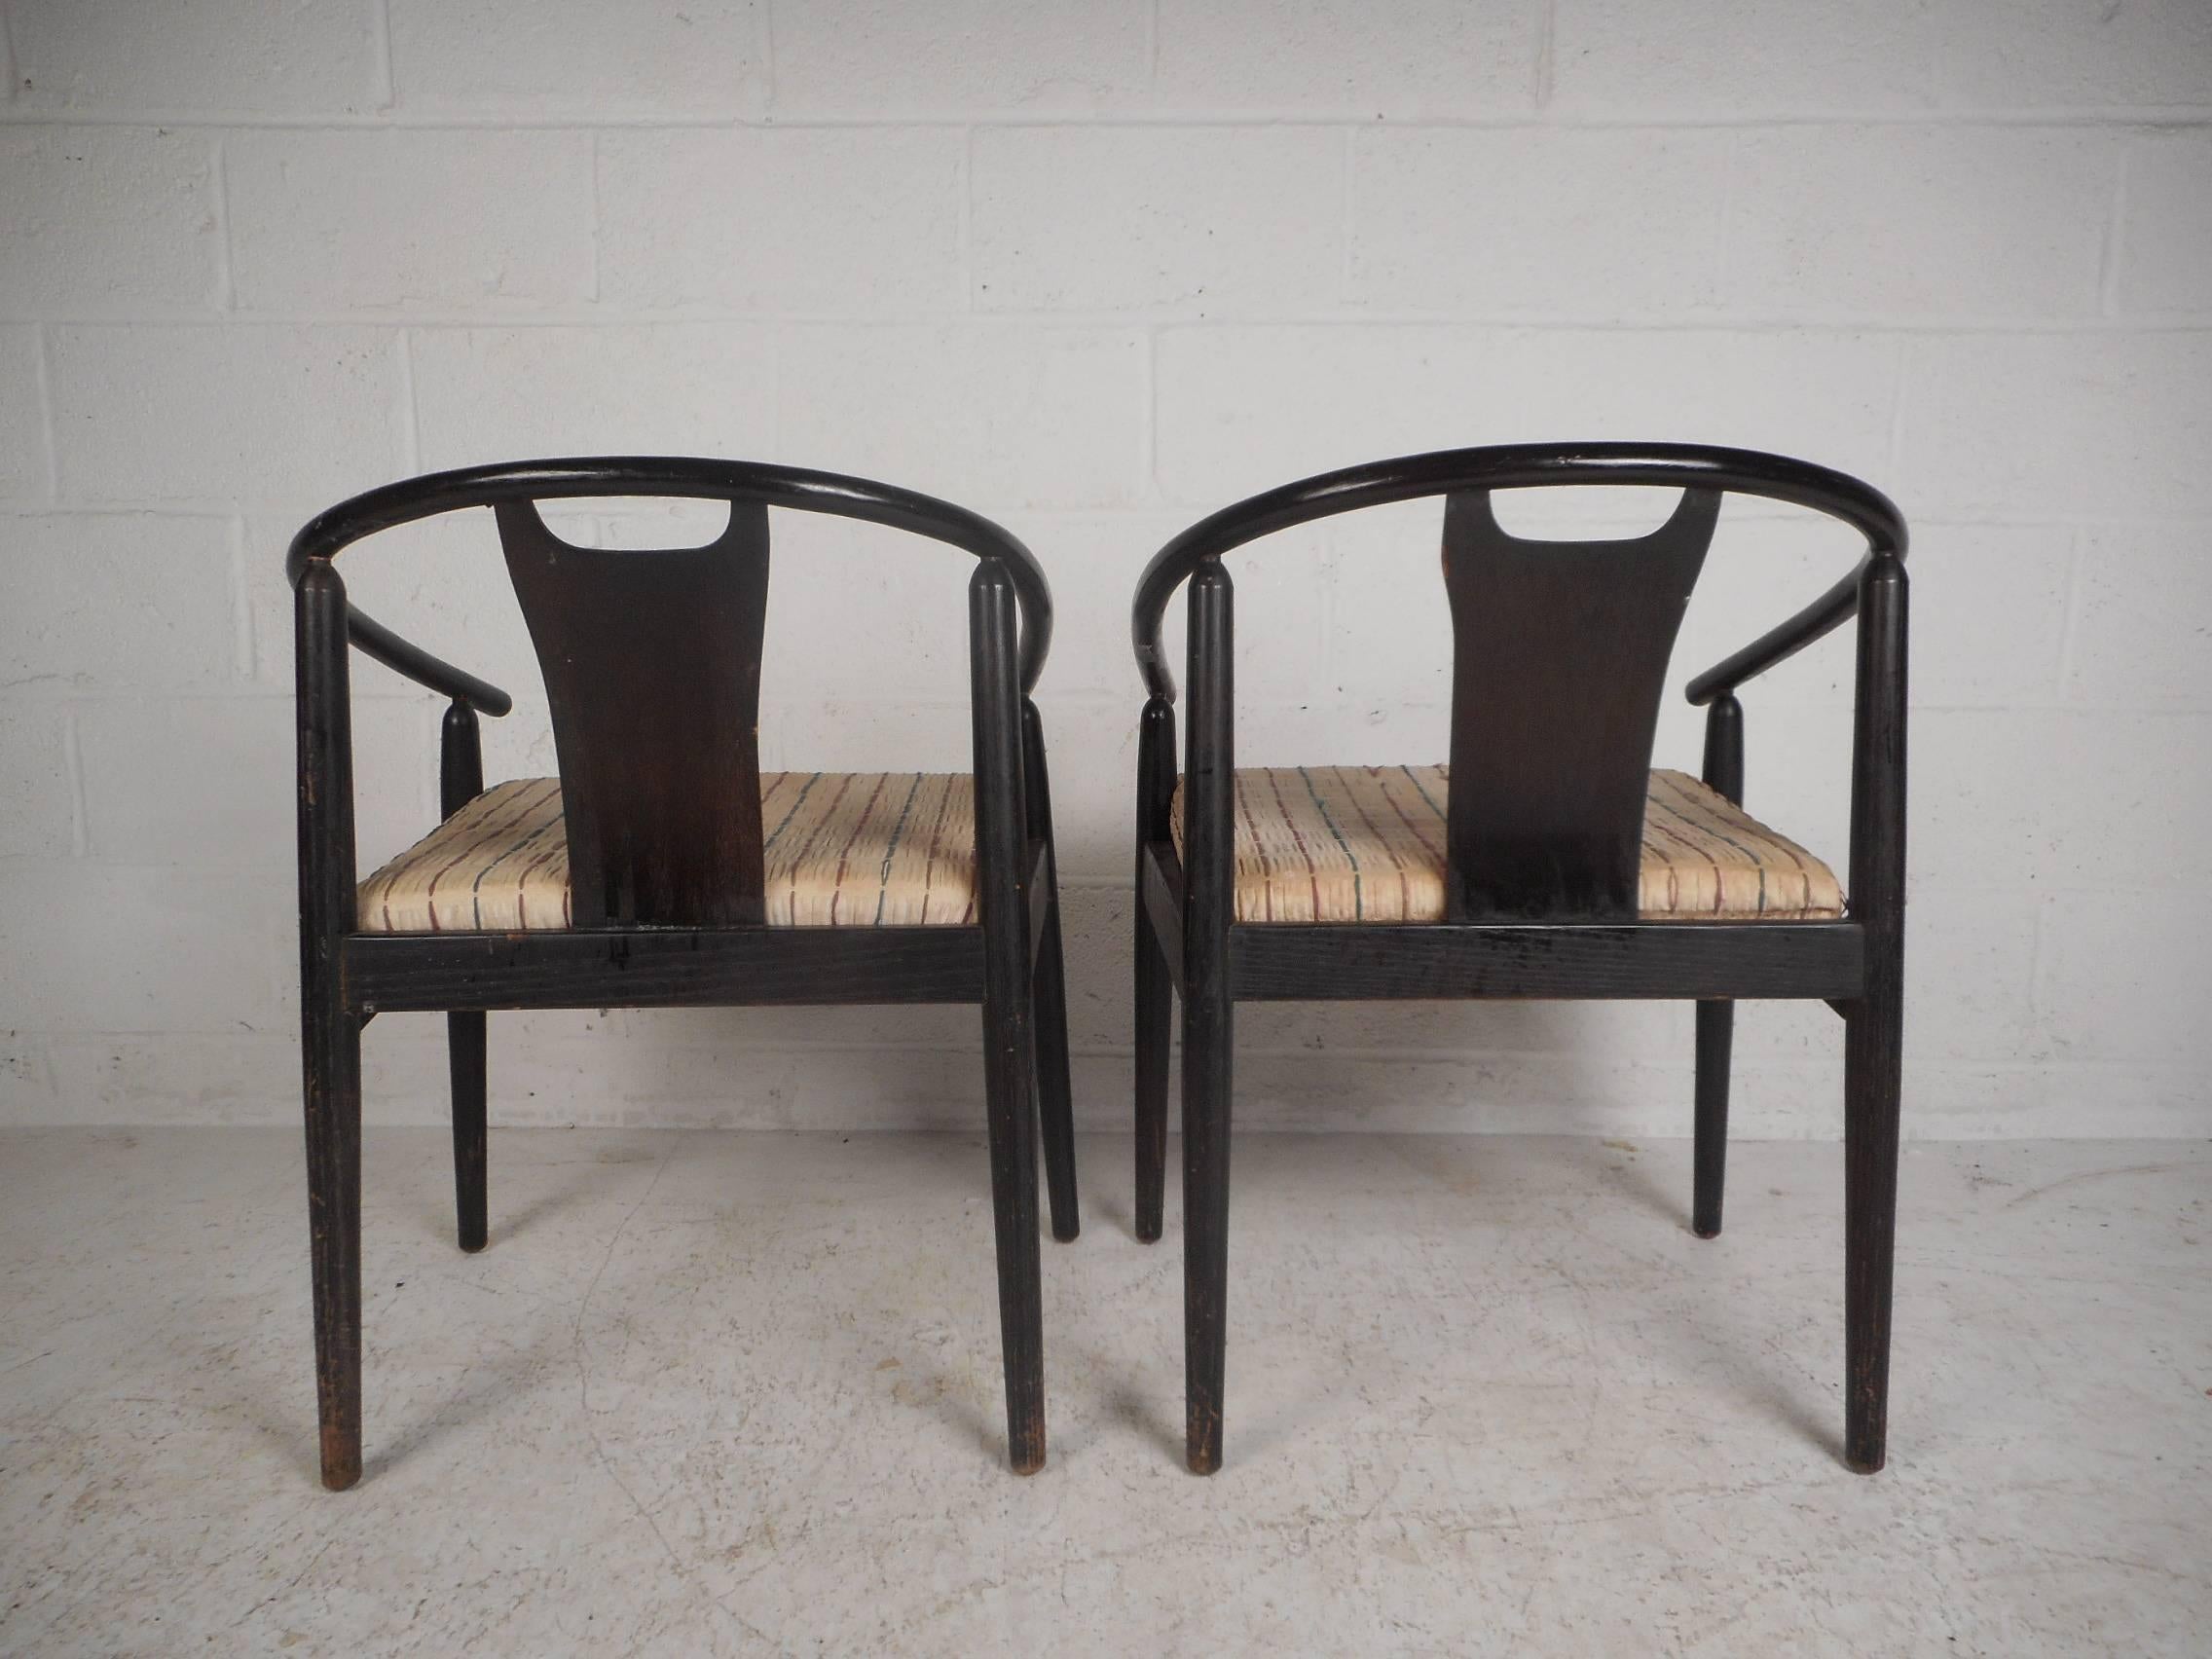 Upholstery Pair of Mid-Century Modern Barrel Back Side Chairs